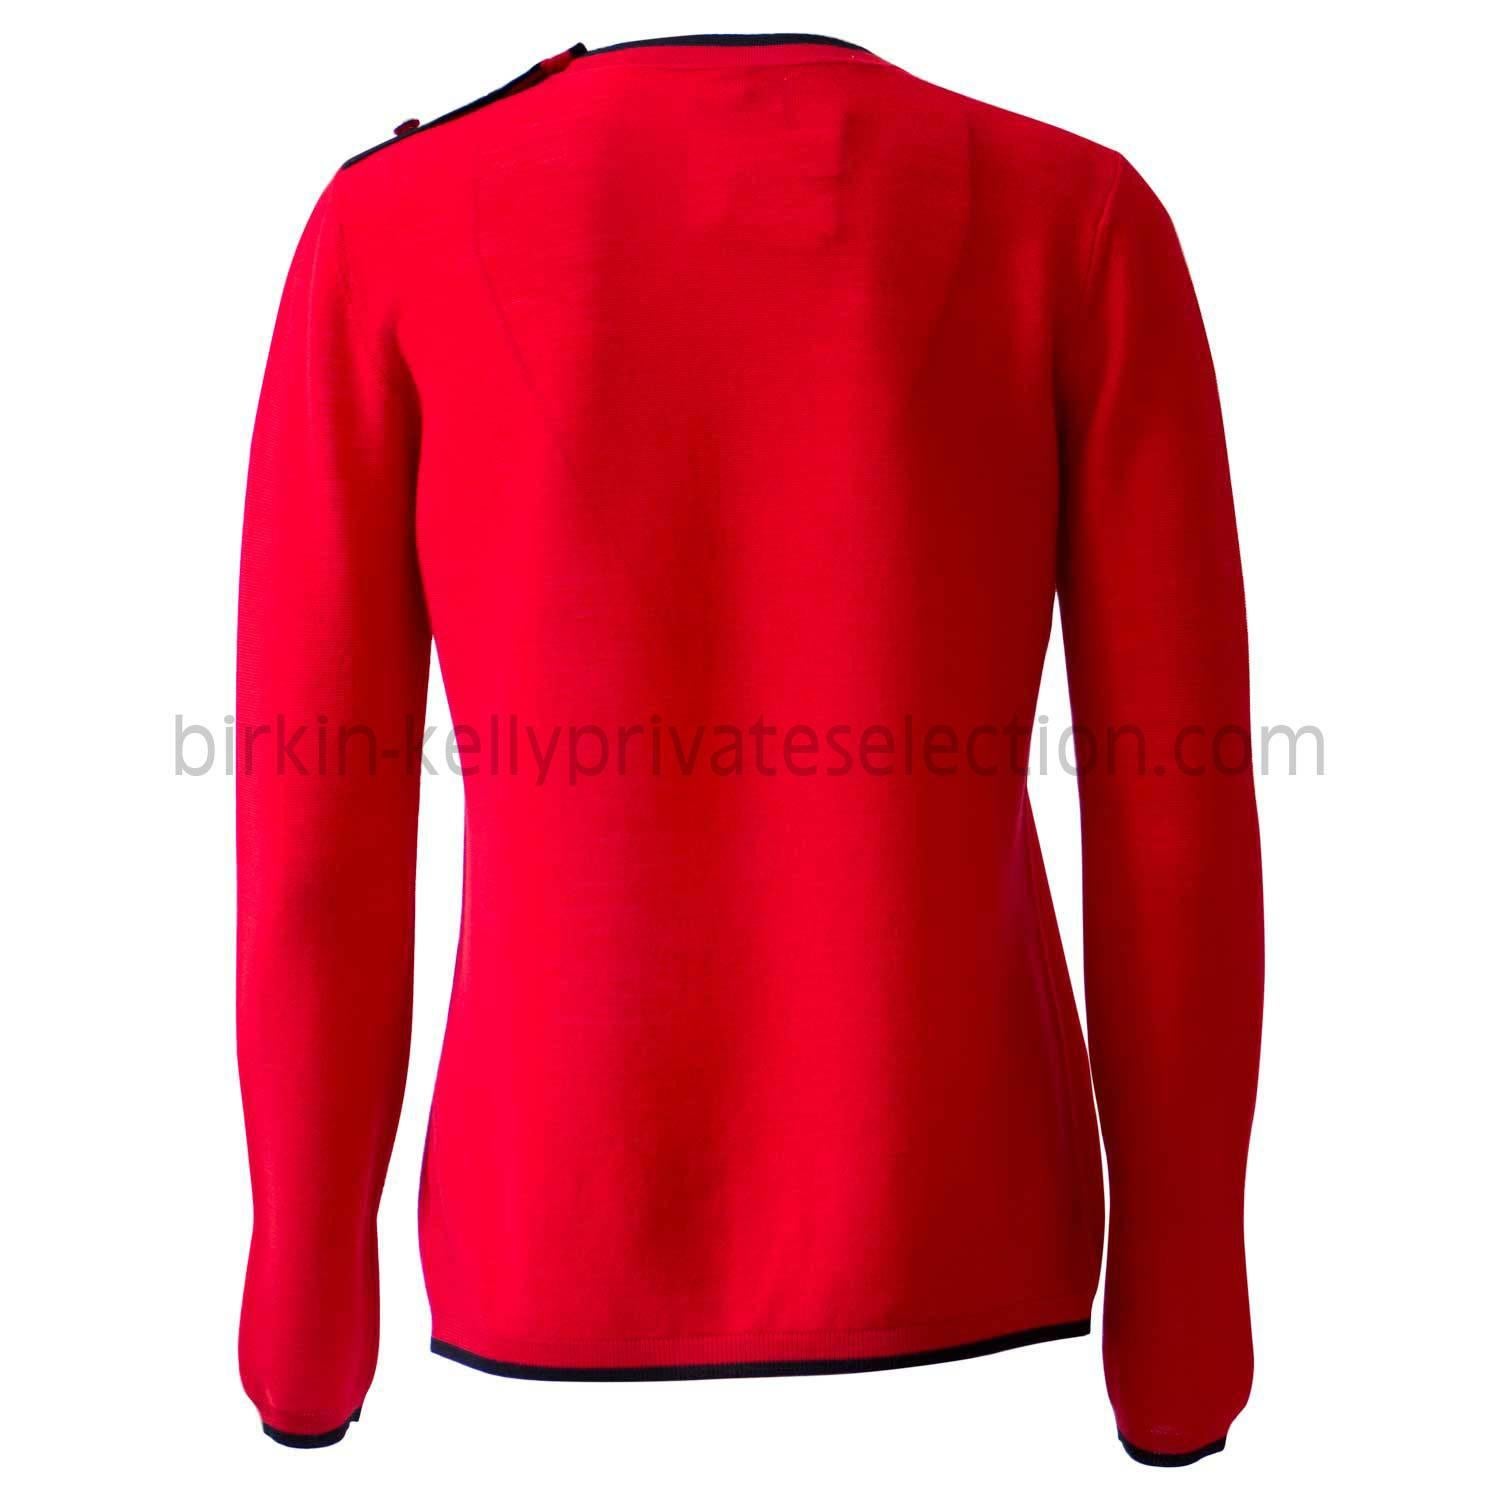 HERMES Sweater 38  JEUX DE POINTS MERINOS Red 2015

Pre-owned and never used.

Bought it in Hermes store in 2015.

Composition; 100% Cotton.

Size; 38.

Color;ROUGE PIMENT.

Model; JEUX DE POINTS MERINOS.

Details:
*Protective felt